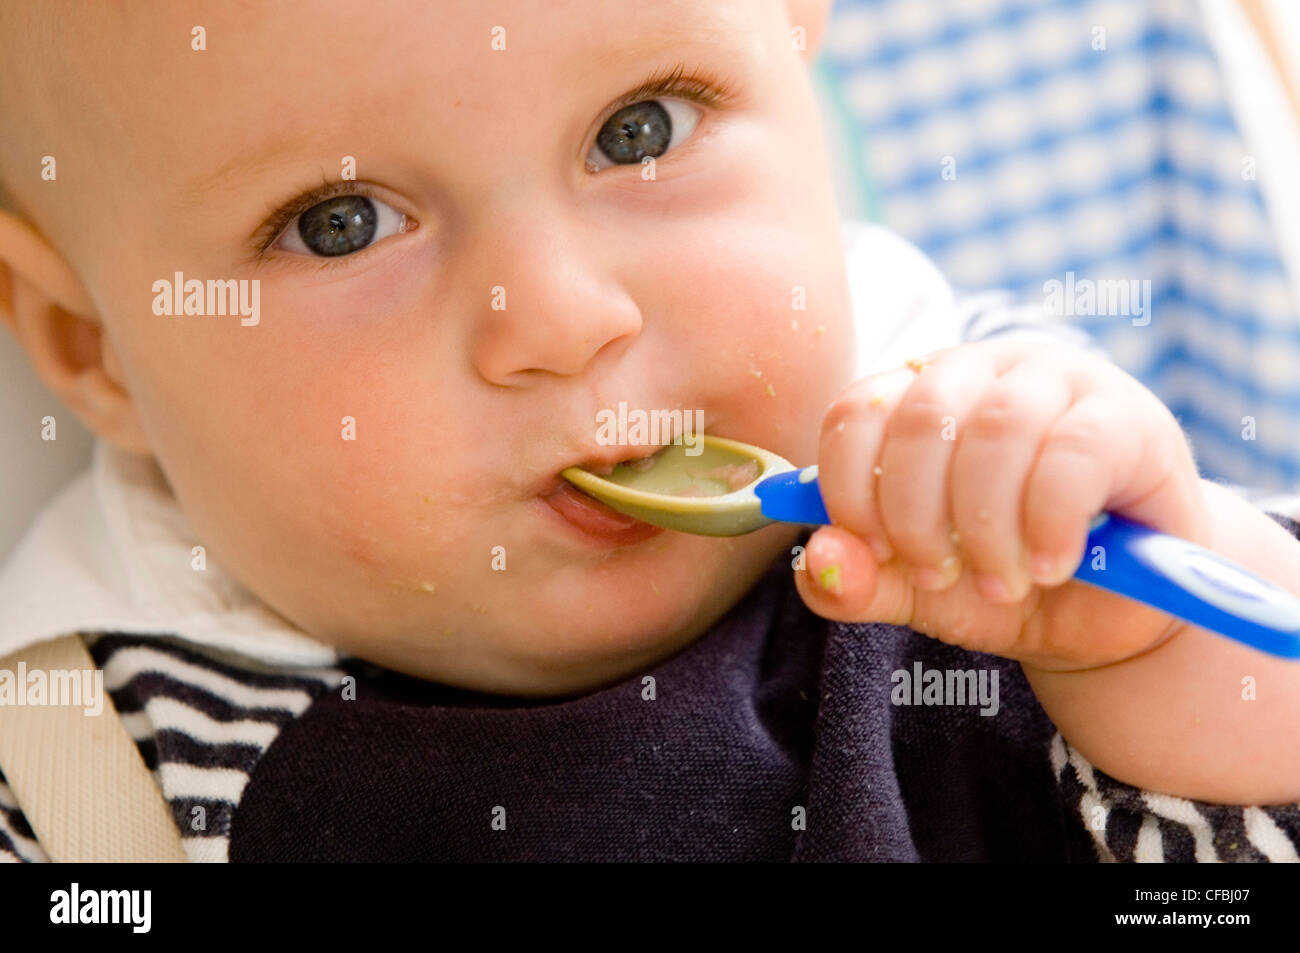 Cropped image of blonde male child aged months wearing a black and white stripey top and a black bib feeding himself baby food Stock Photo